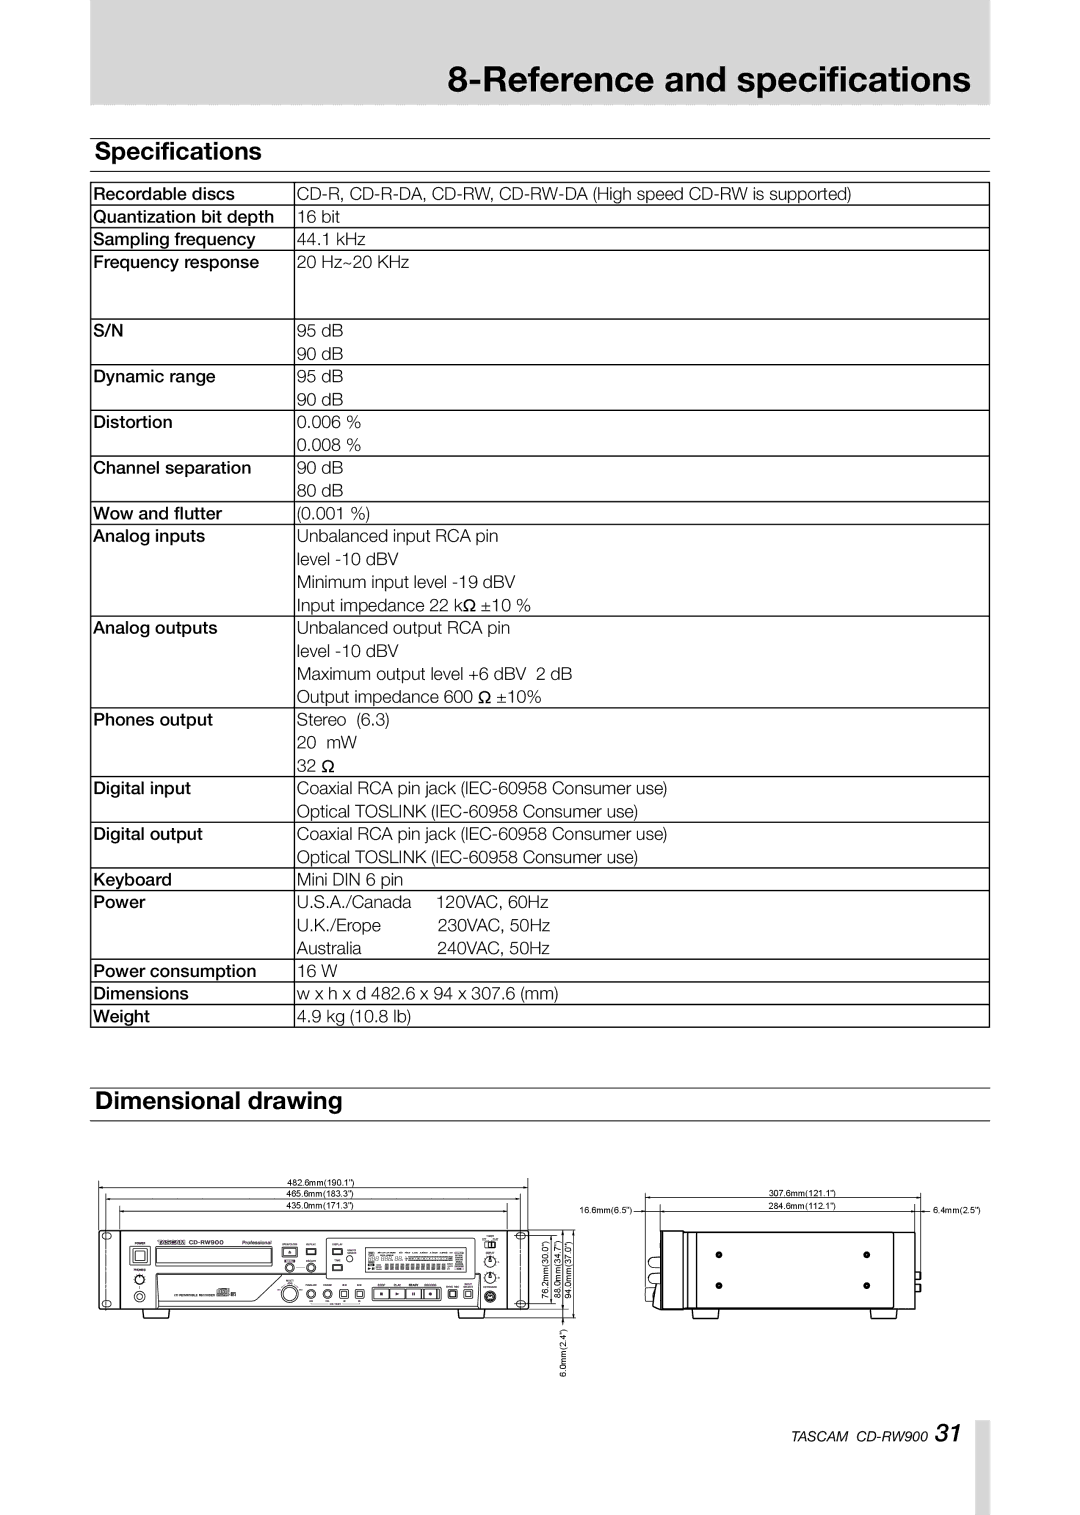 Teac CD-RW900CD owner manual Specifications, Dimensional drawing, 32 Ø 